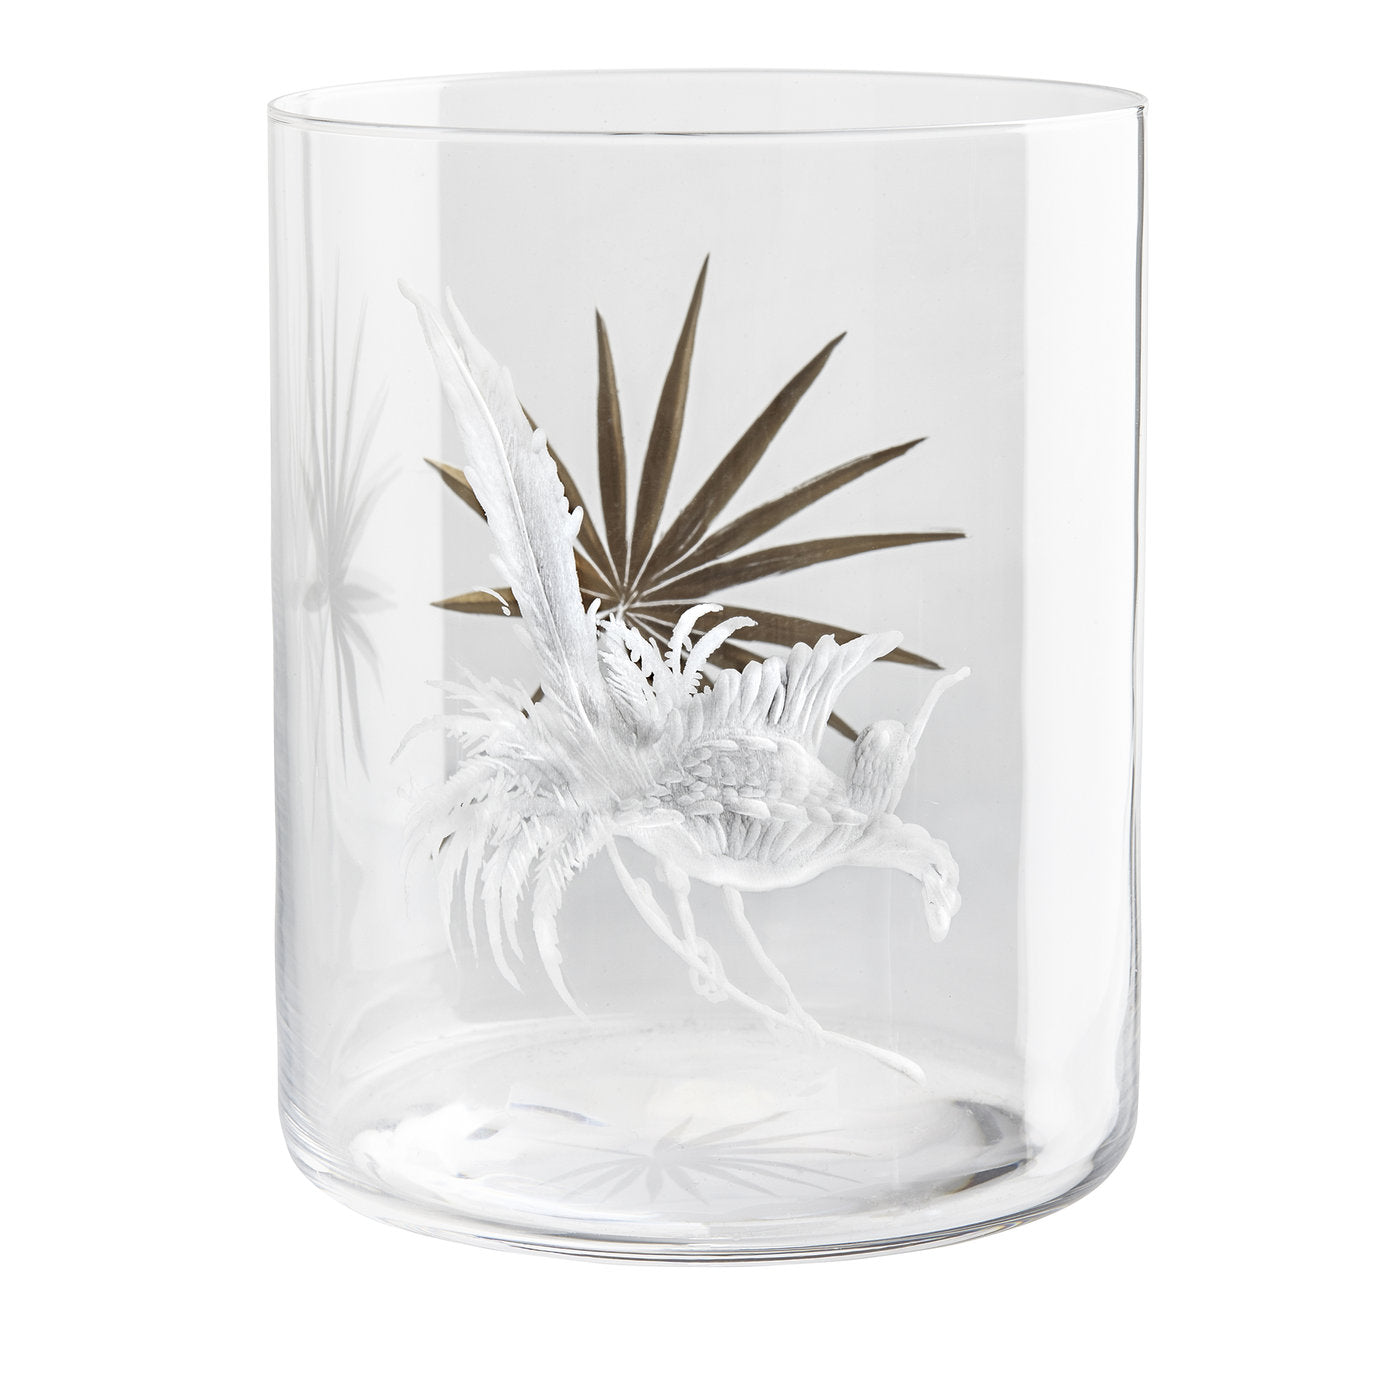 Set of 6 Birds of paradise Crystal Glasses - Alternative view 4